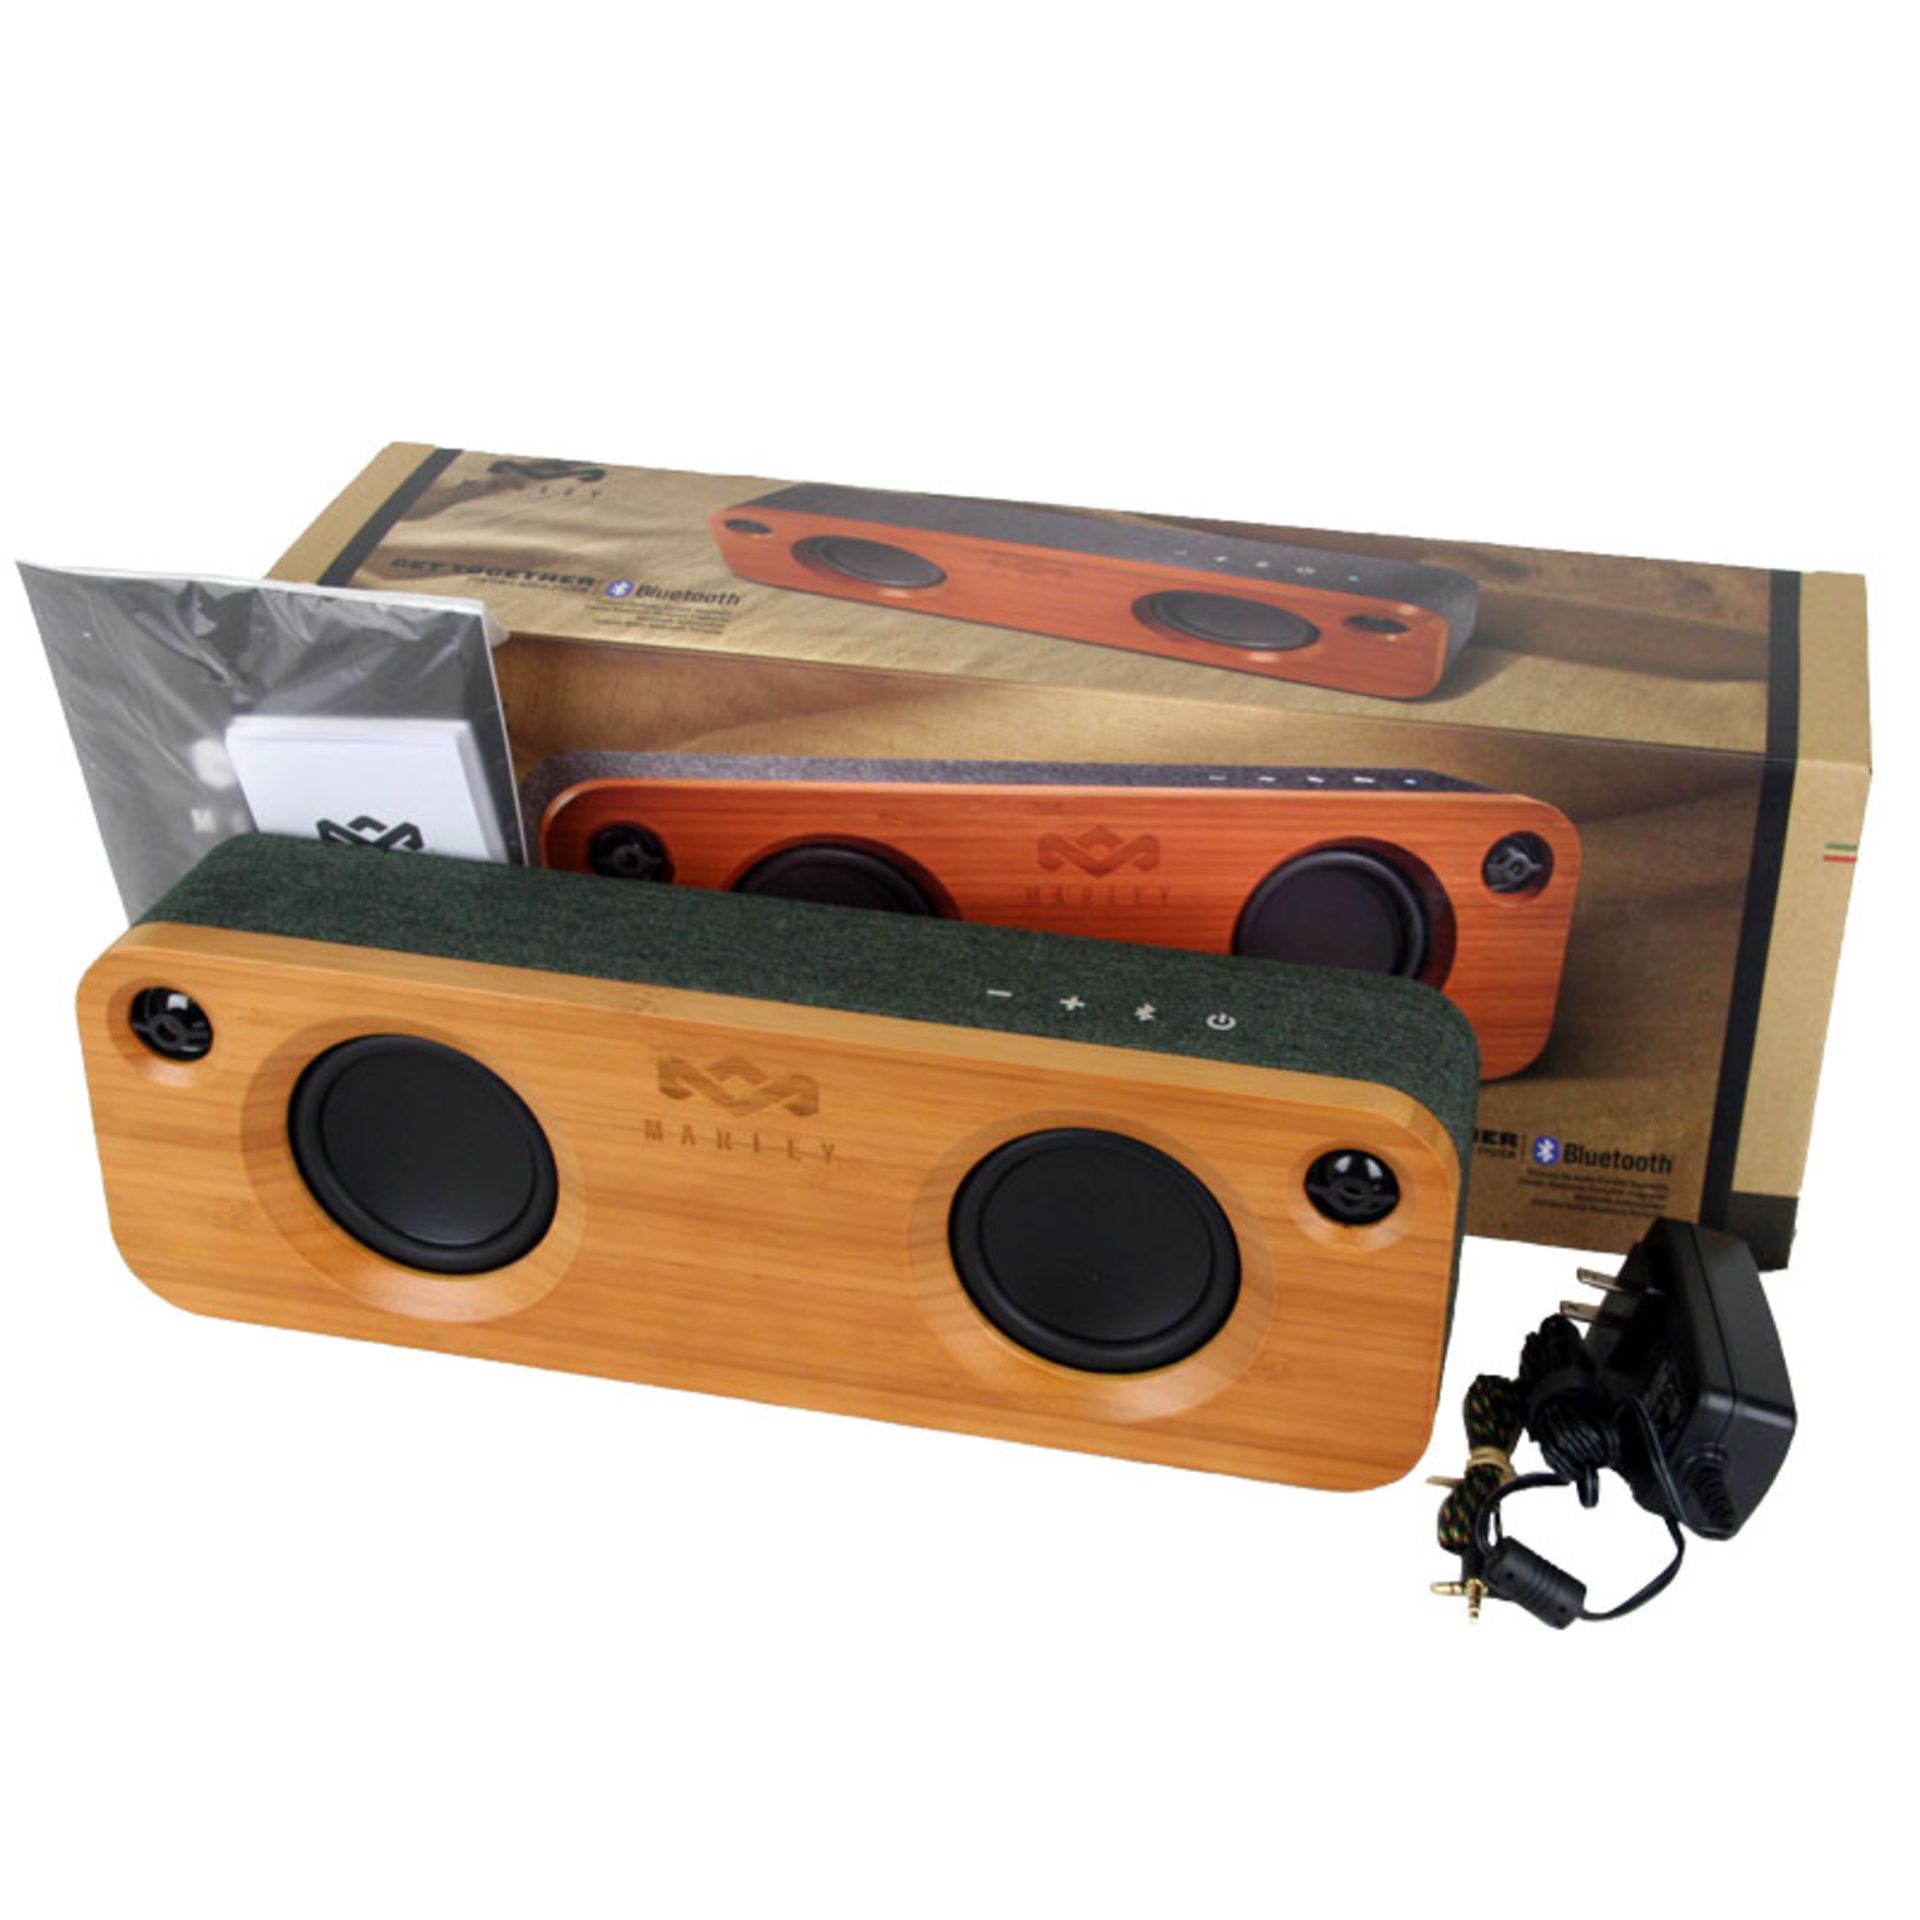 + VAT Grade A Marley Get It Together Portable Audio System - Bluetooth - 8 Hour Battery - Exclusive